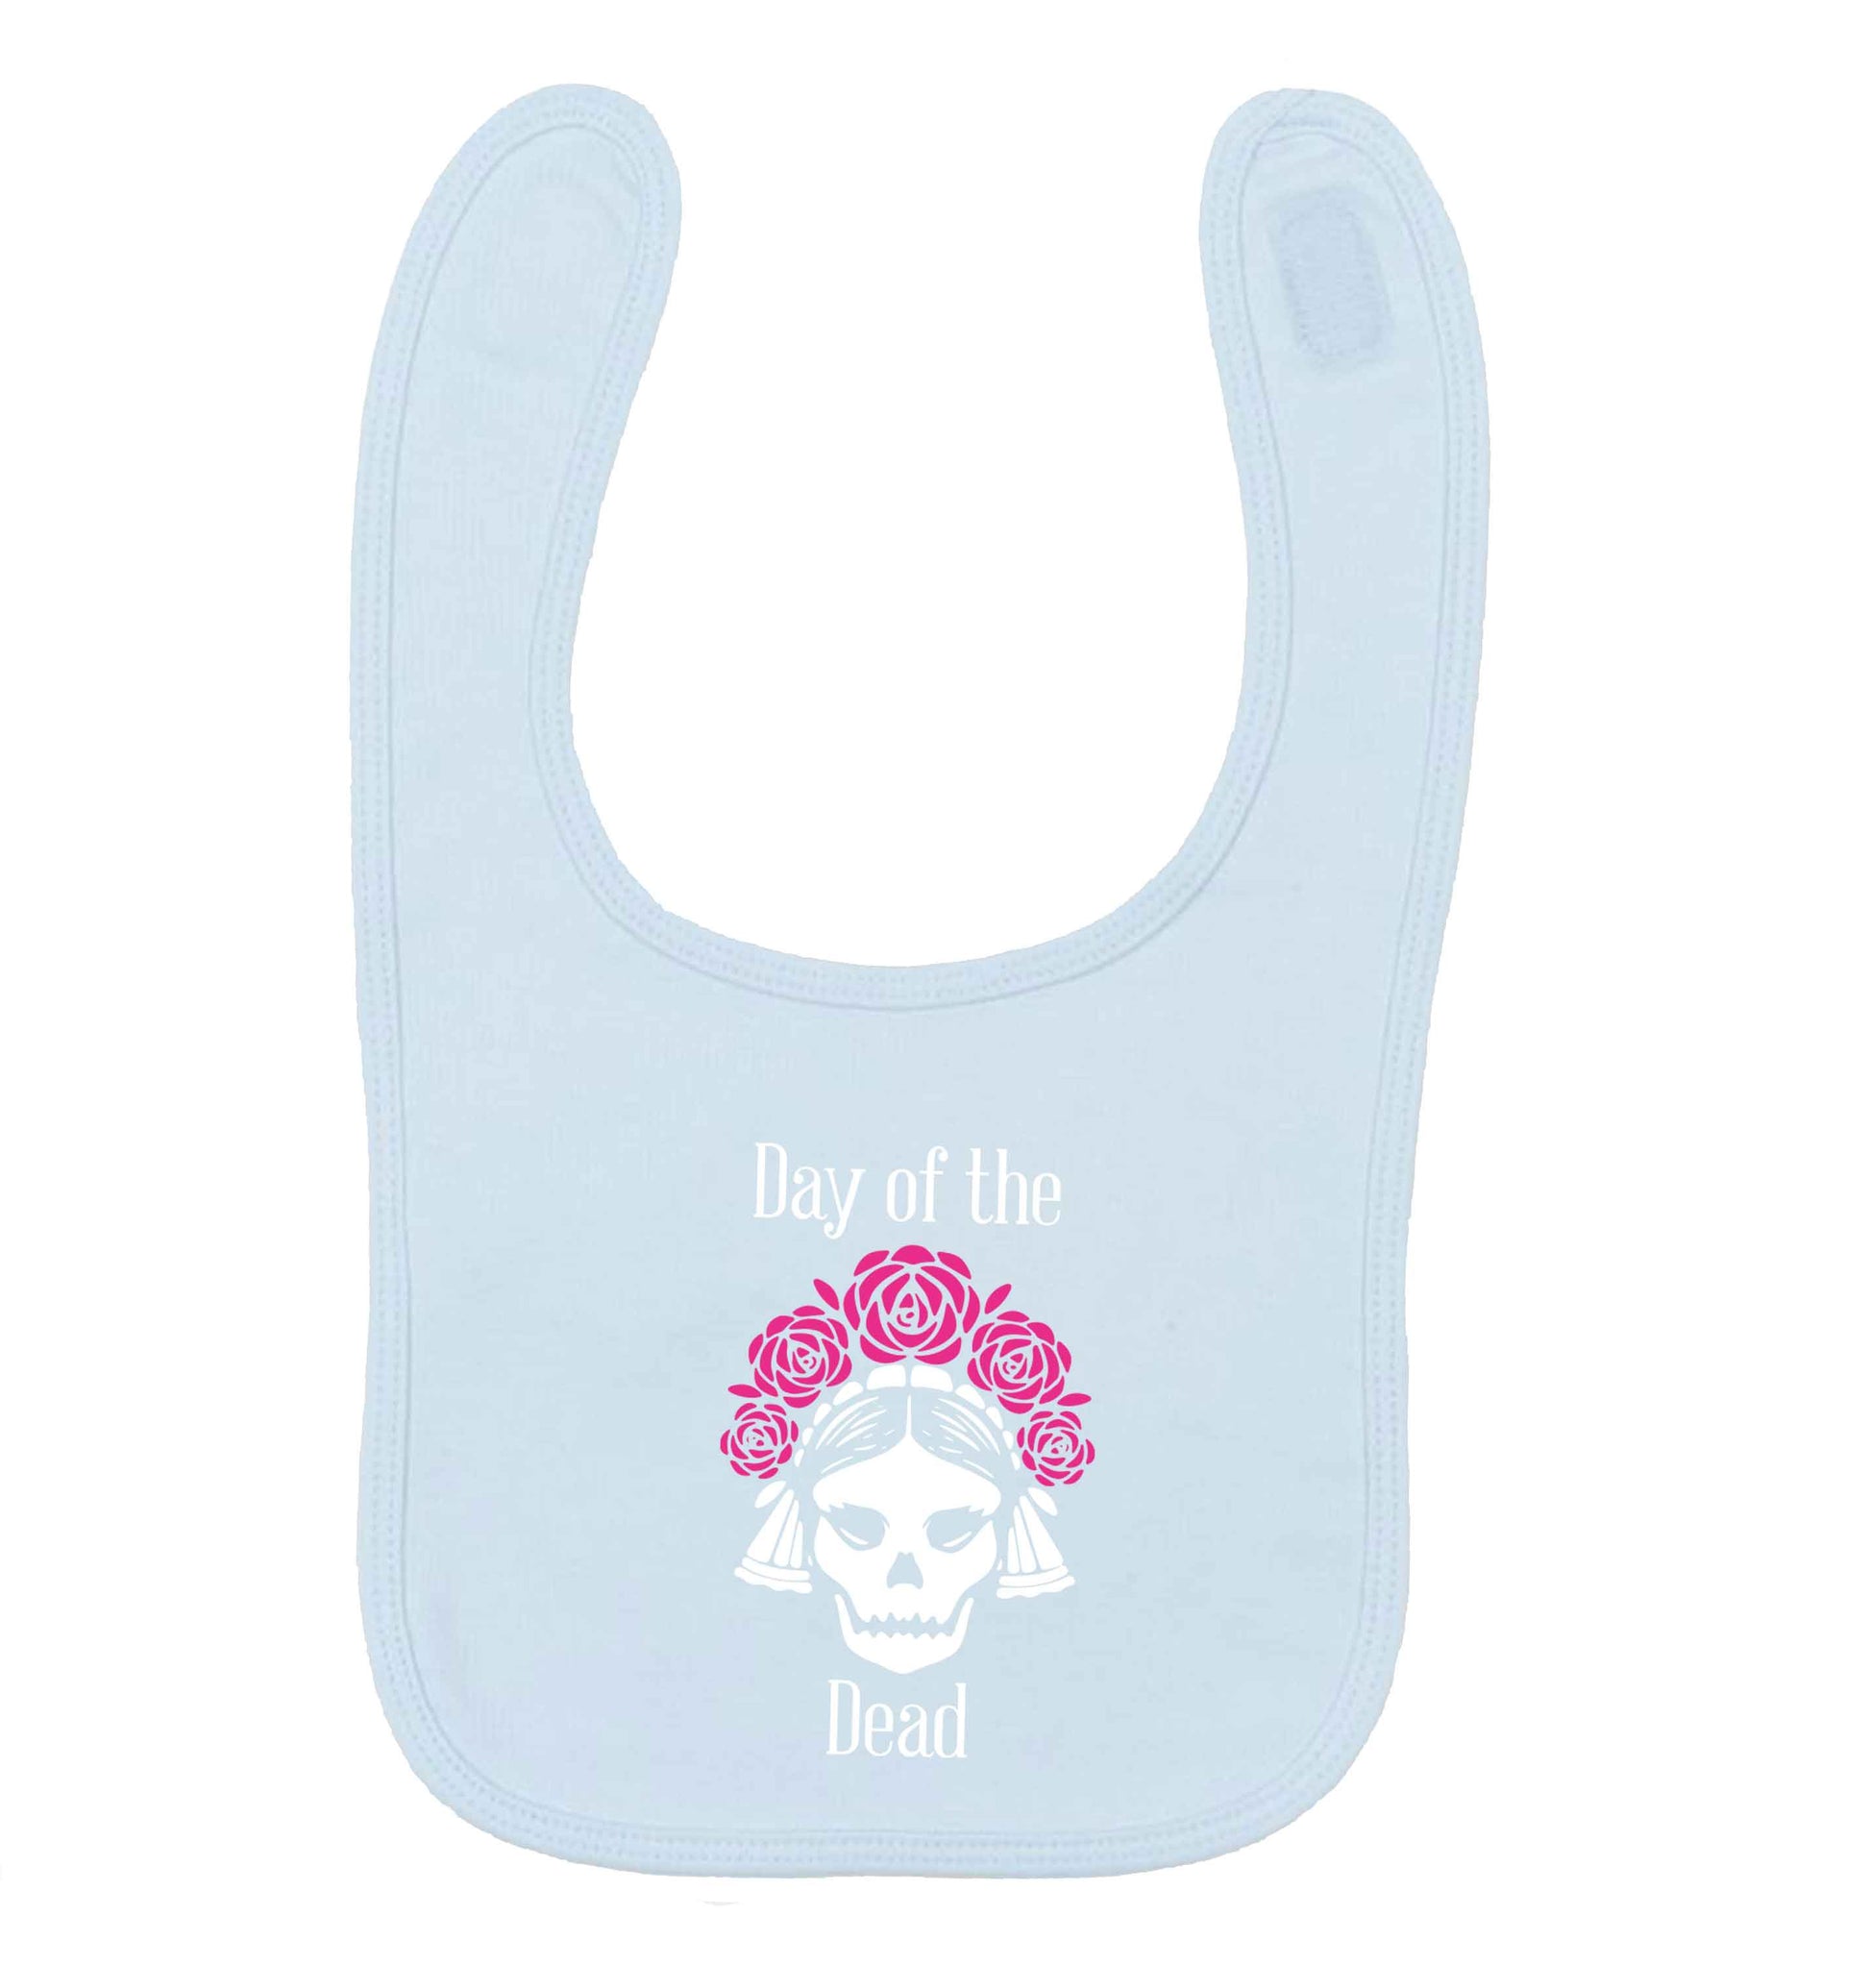 Day of the dead pale blue baby bib